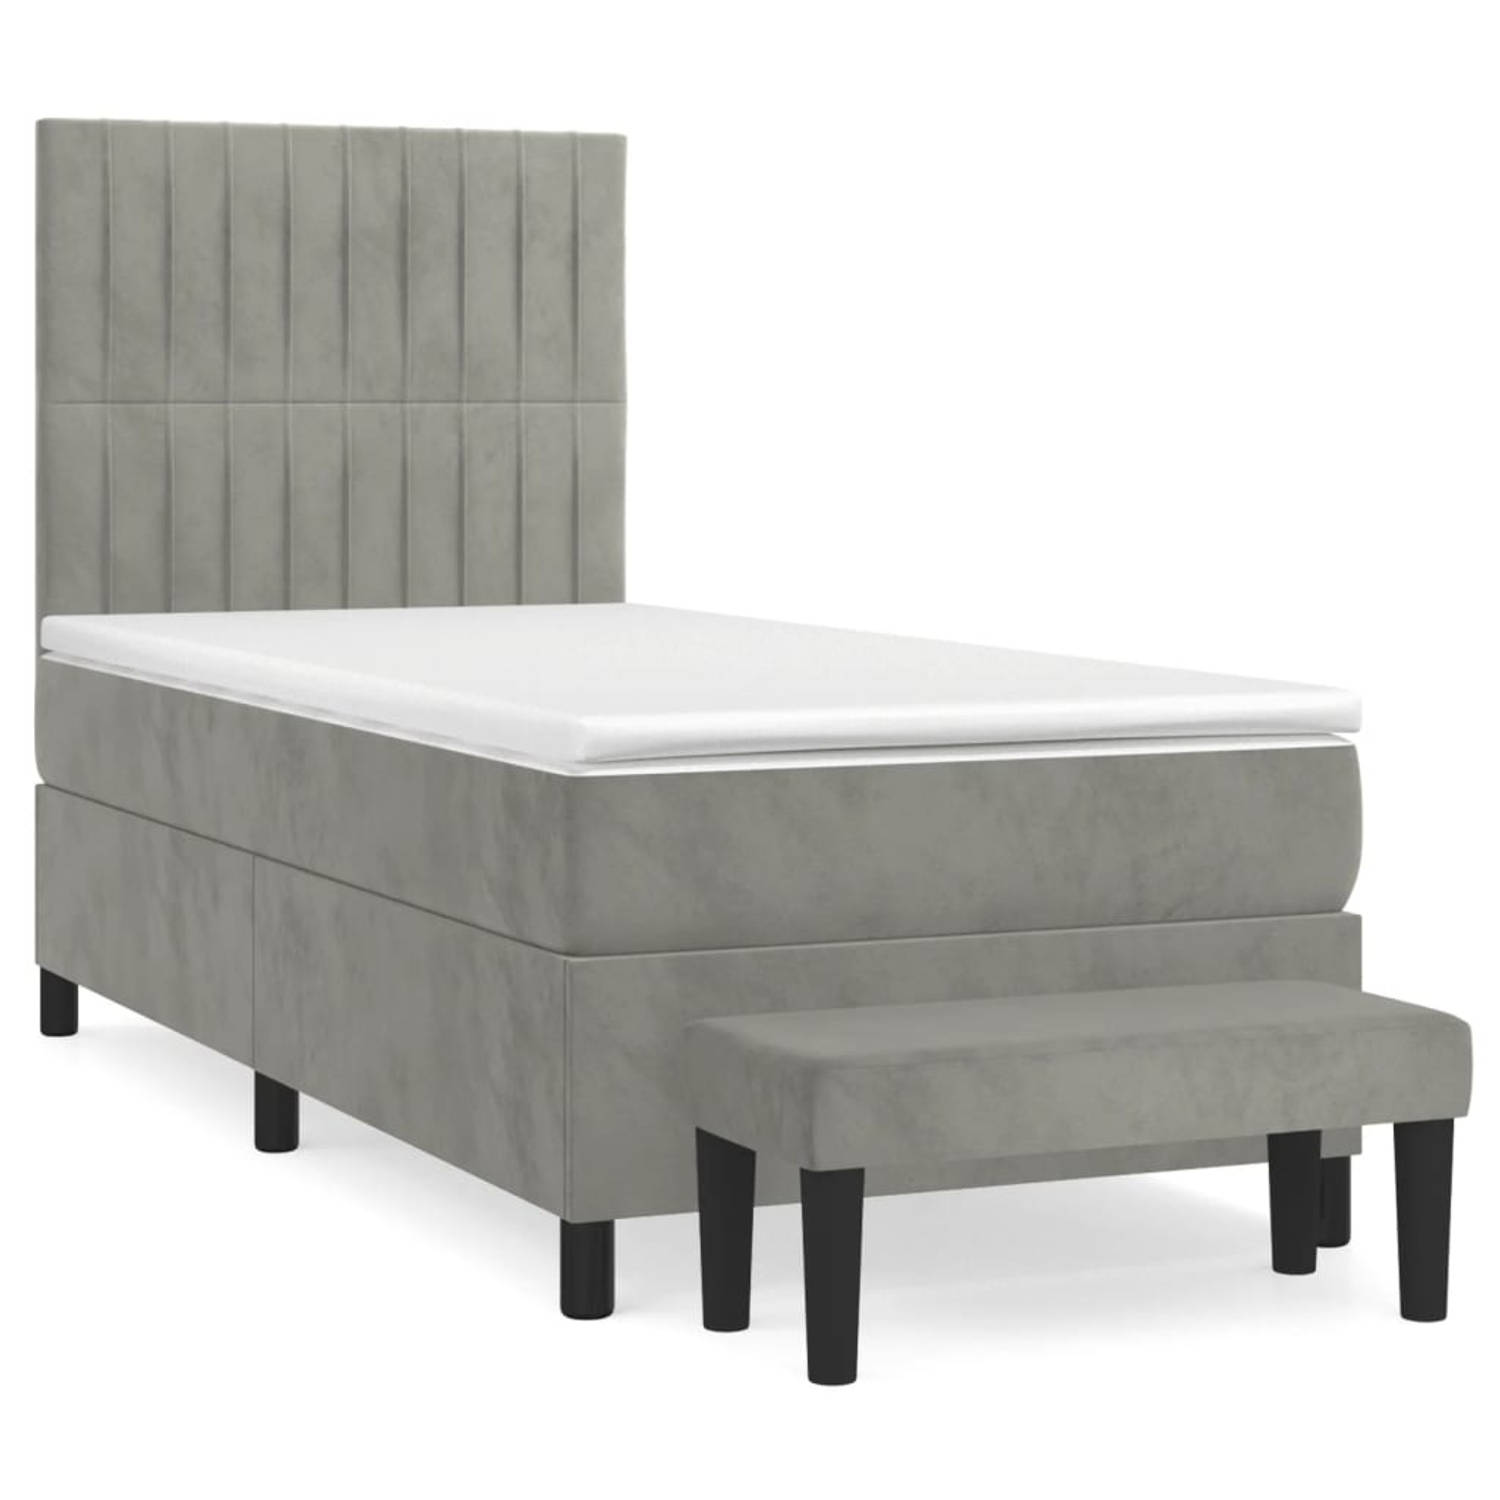 The Living Store Bed - The Living Store - Boxspringbed - 203 x 90 x 118/128 cm - Lichtgrijs